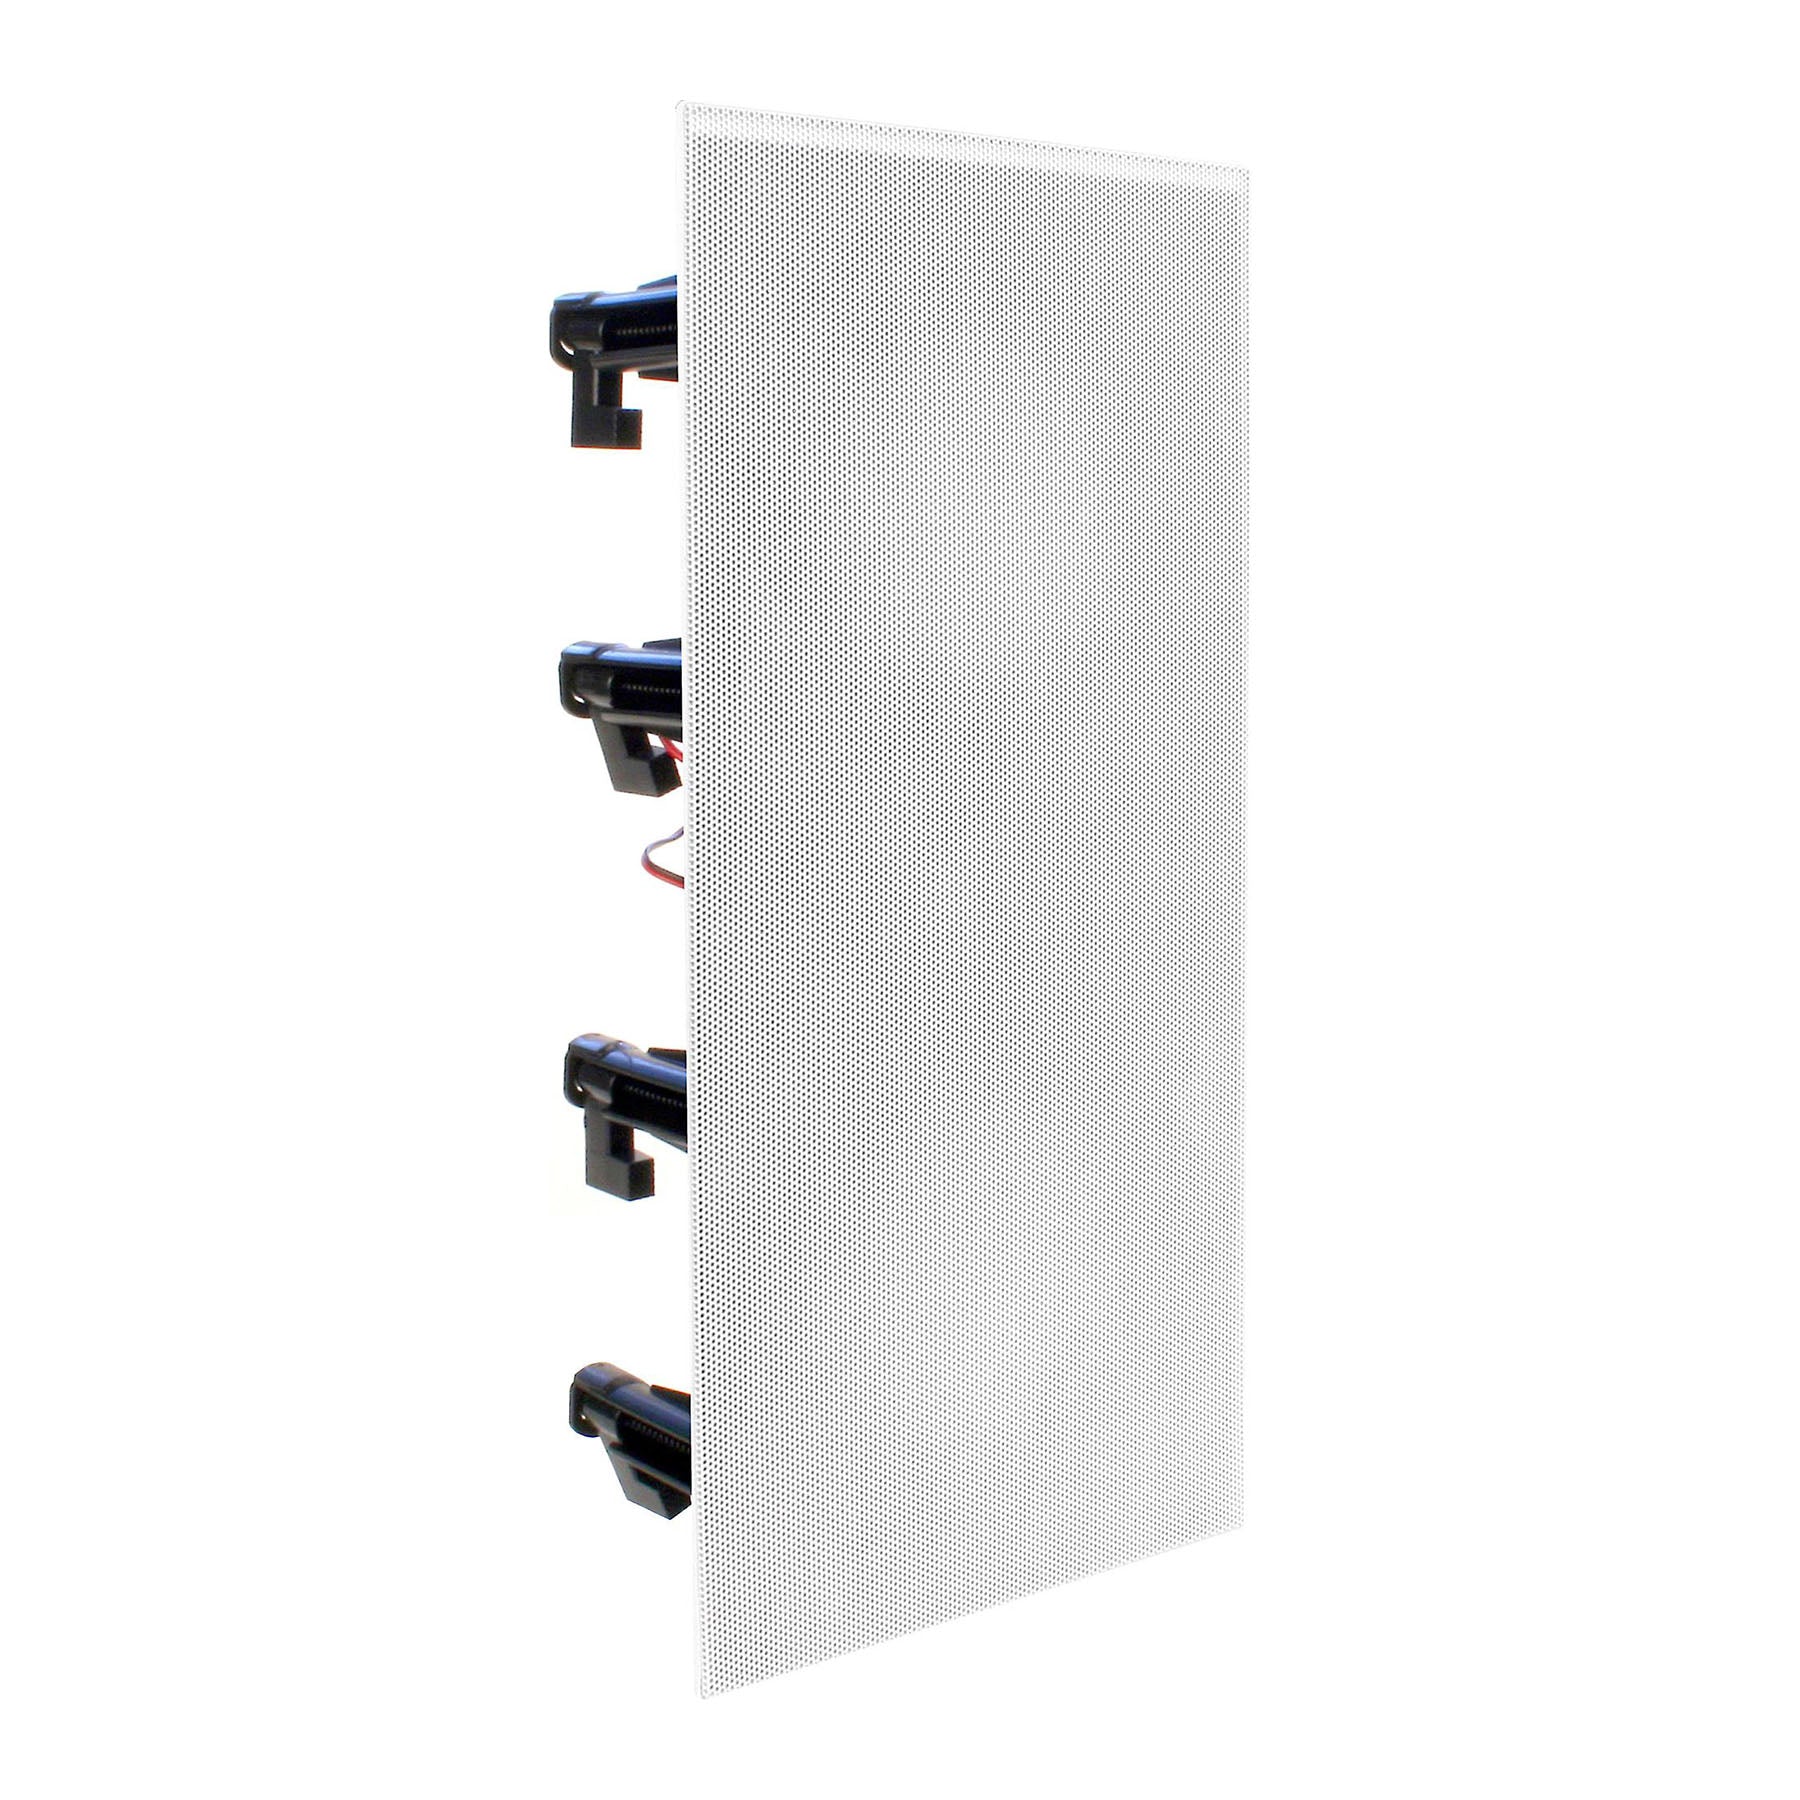 Revel W253L LCR Suitable for Vertical or Horizontal Orientation